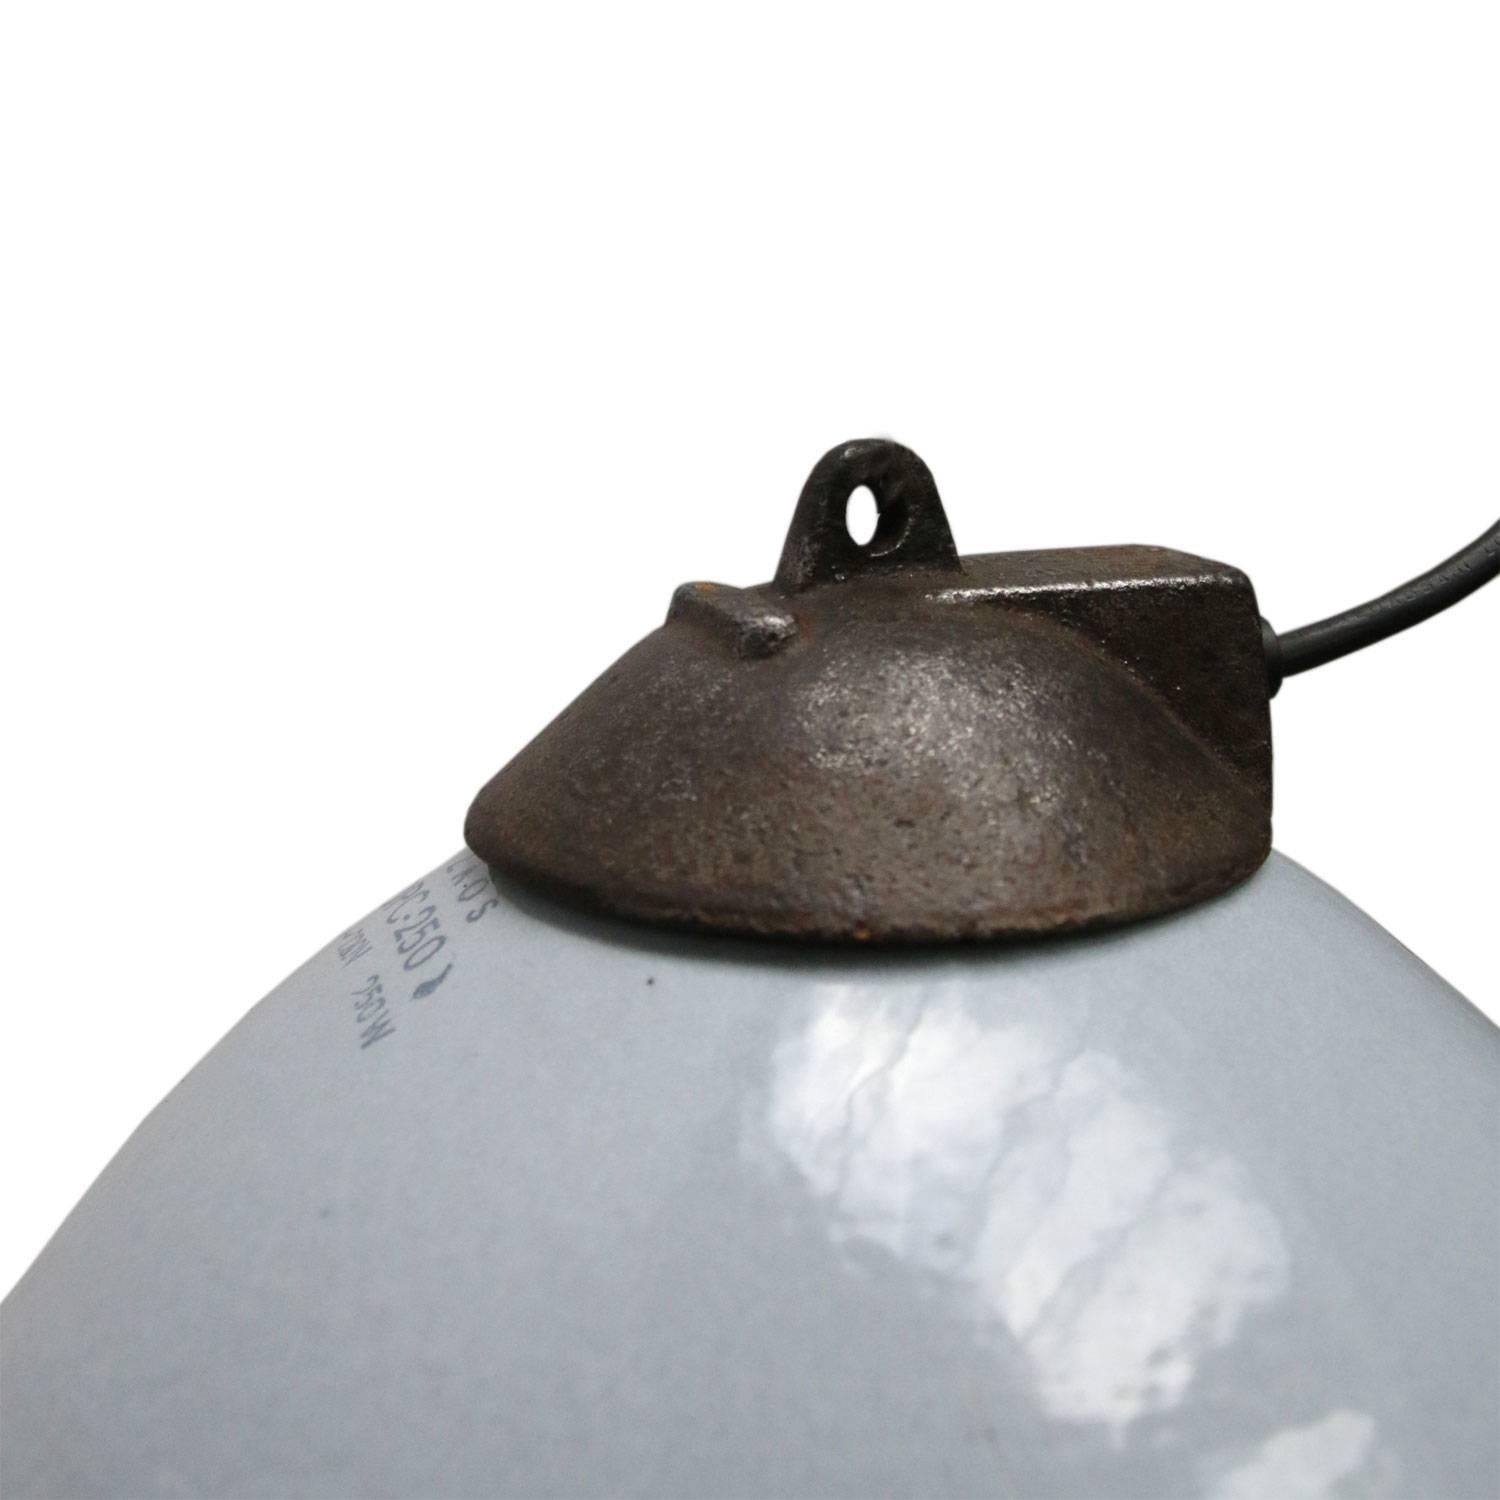 Grey enamel factory pendant.
White enamel white interior cast iron top.

Weight: 1.9 kg / 4.2 lb

All lamps have been made suitable by international standards for incandescent light bulbs, energy-efficient and LED bulbs. New wiring is CE